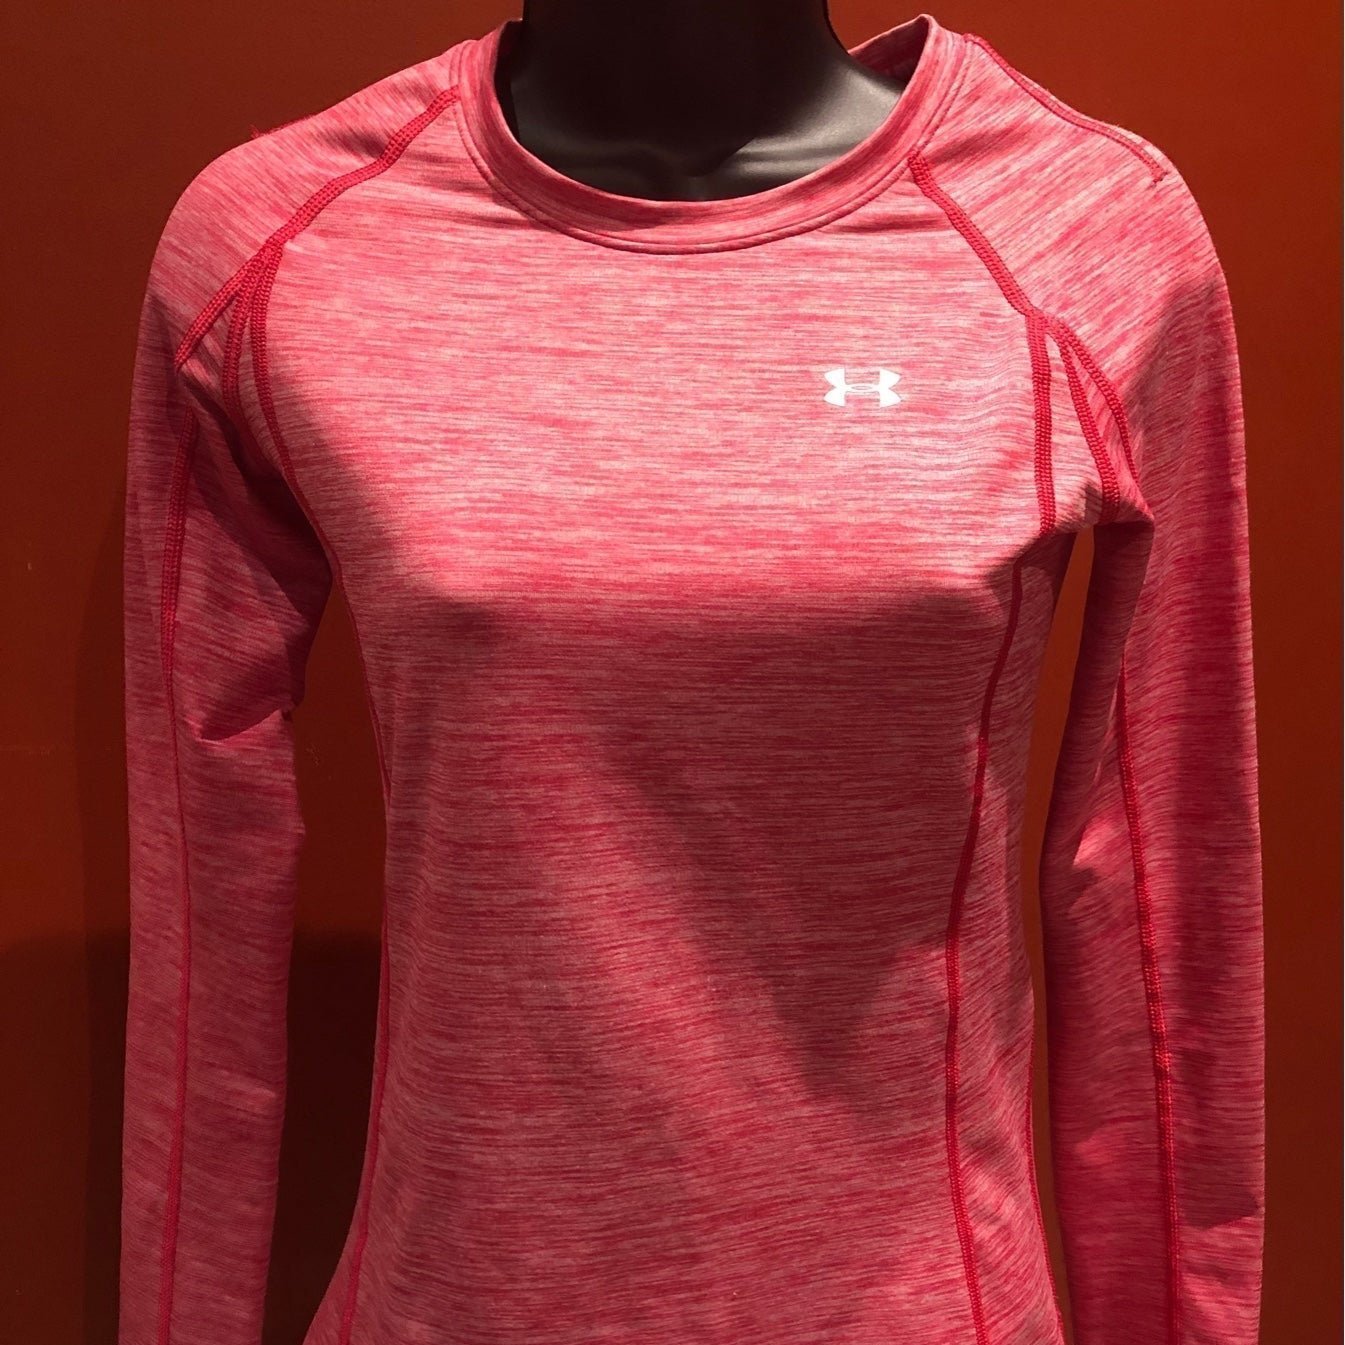 Under Armour women´s running zip. Pink. Almost new. Small pofi5w492